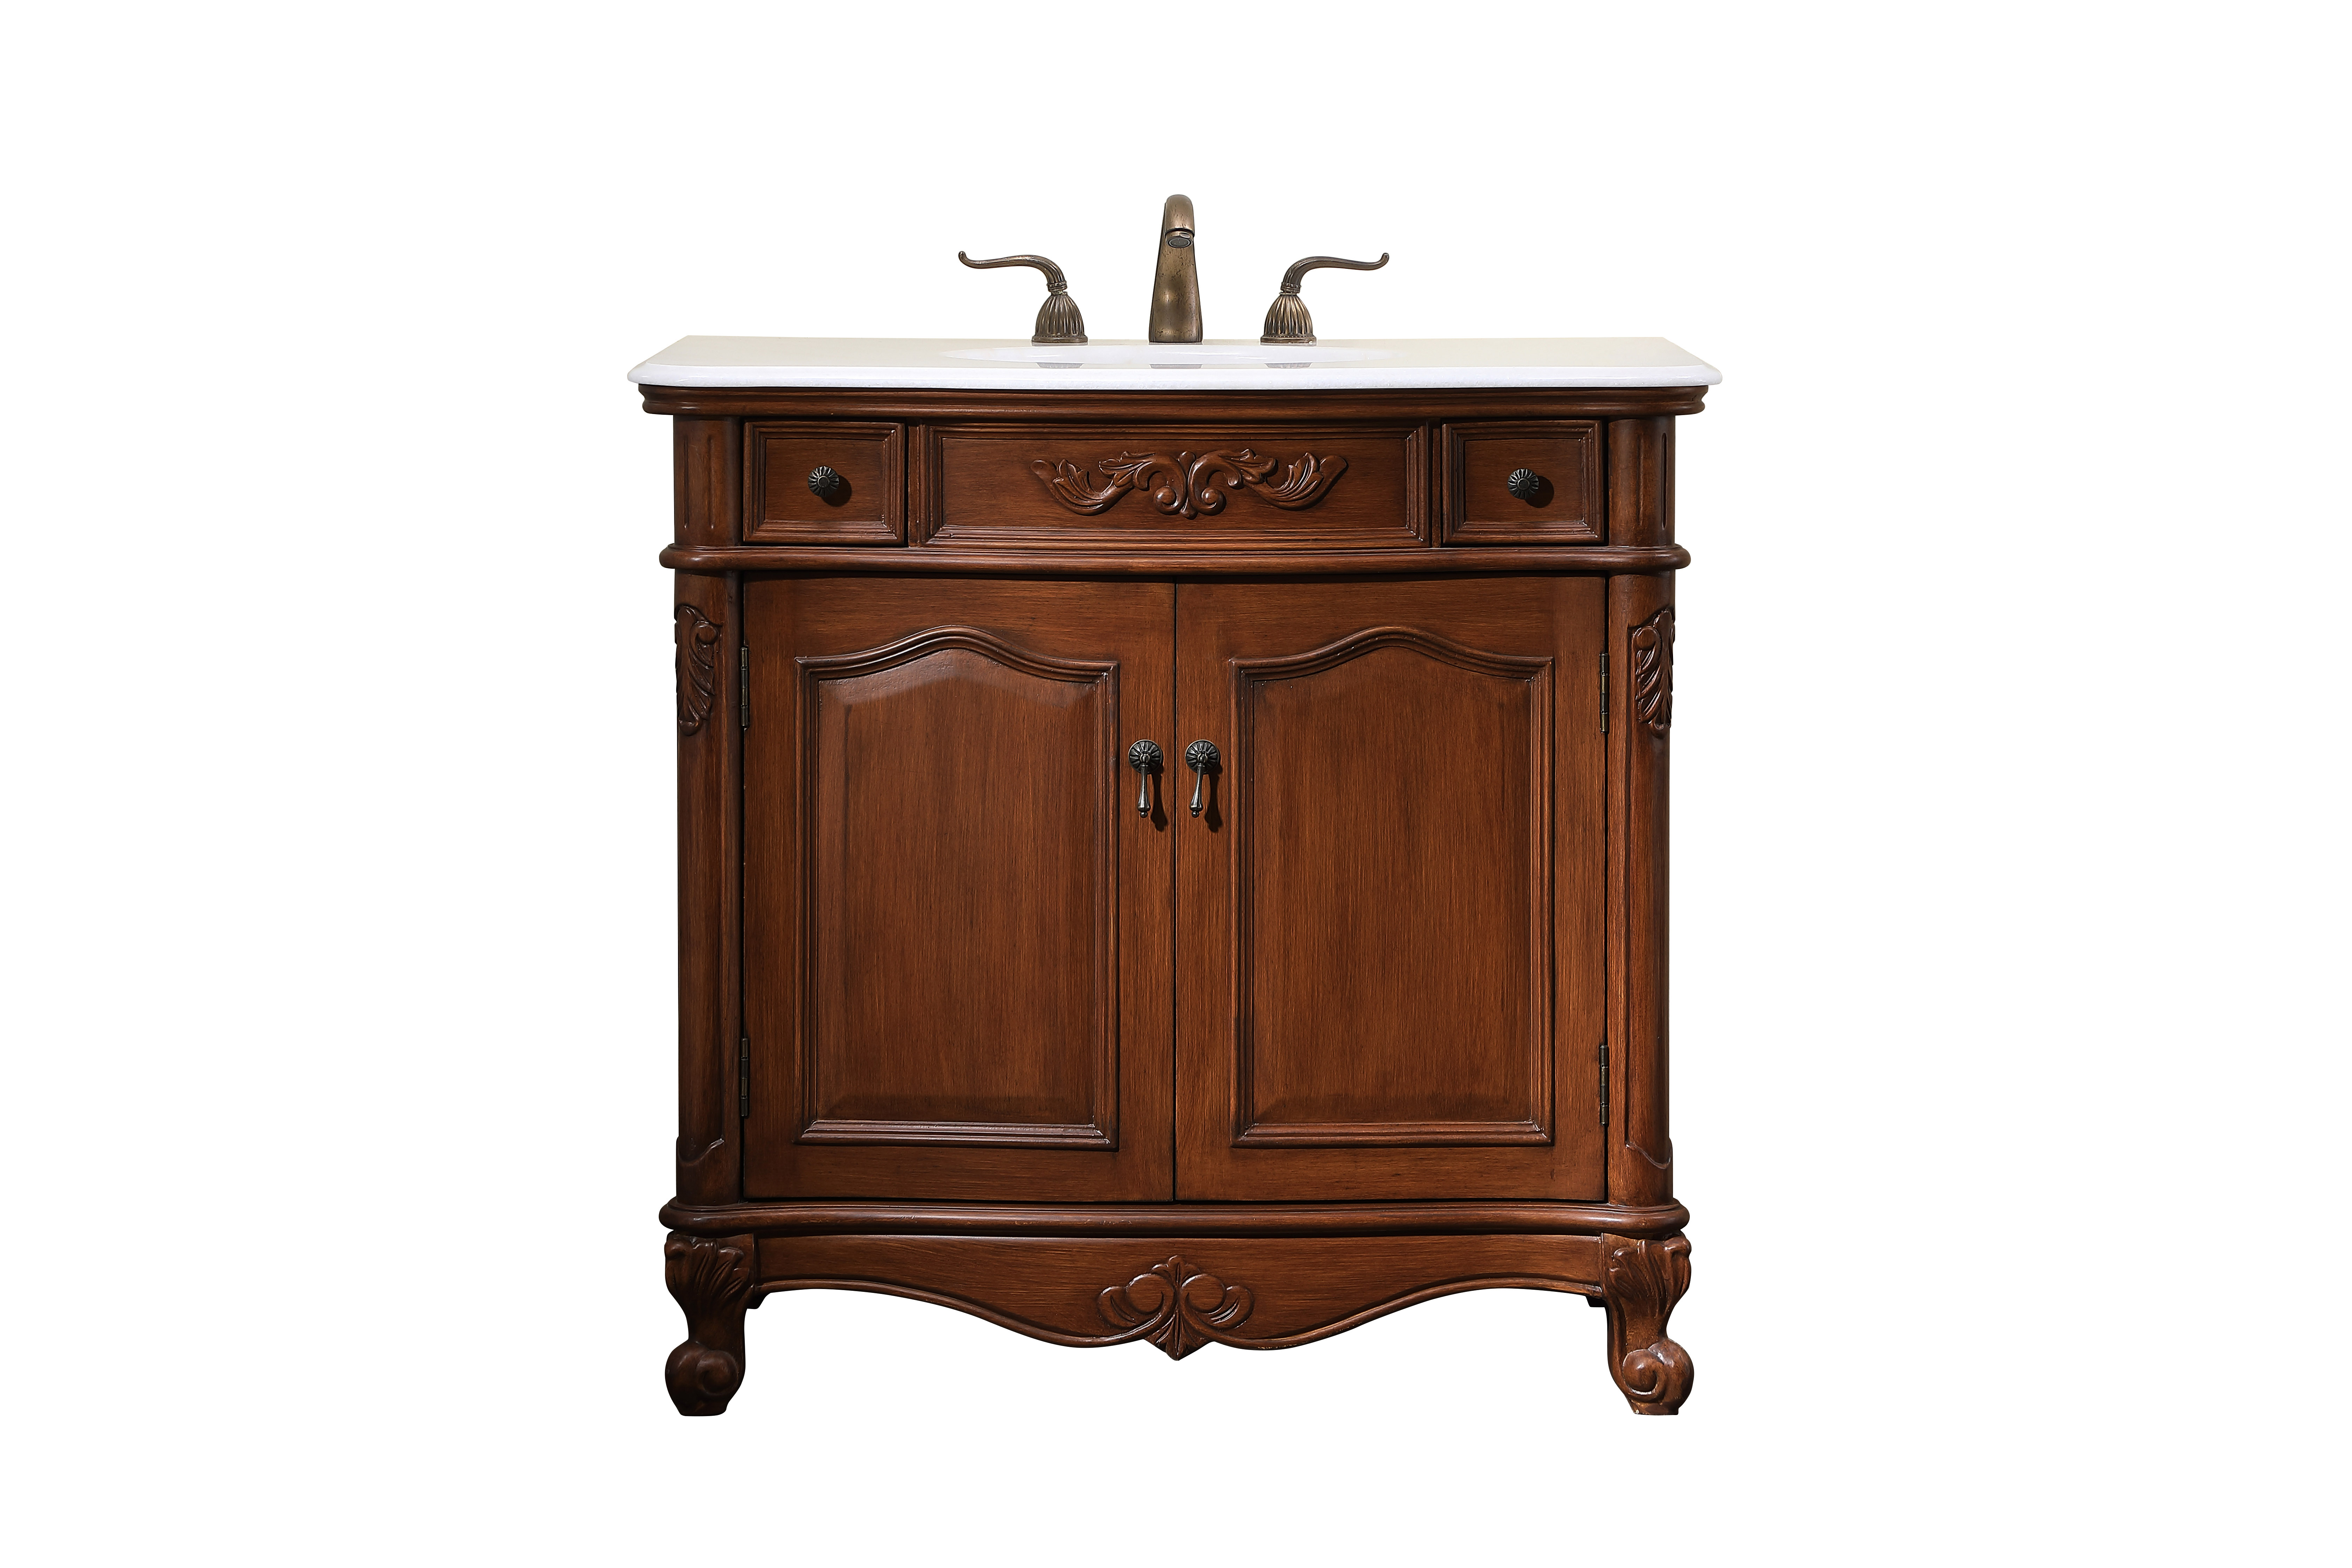 36" Deep Chestnut Finish Vanity Victorian Style Leg with White Marble Top